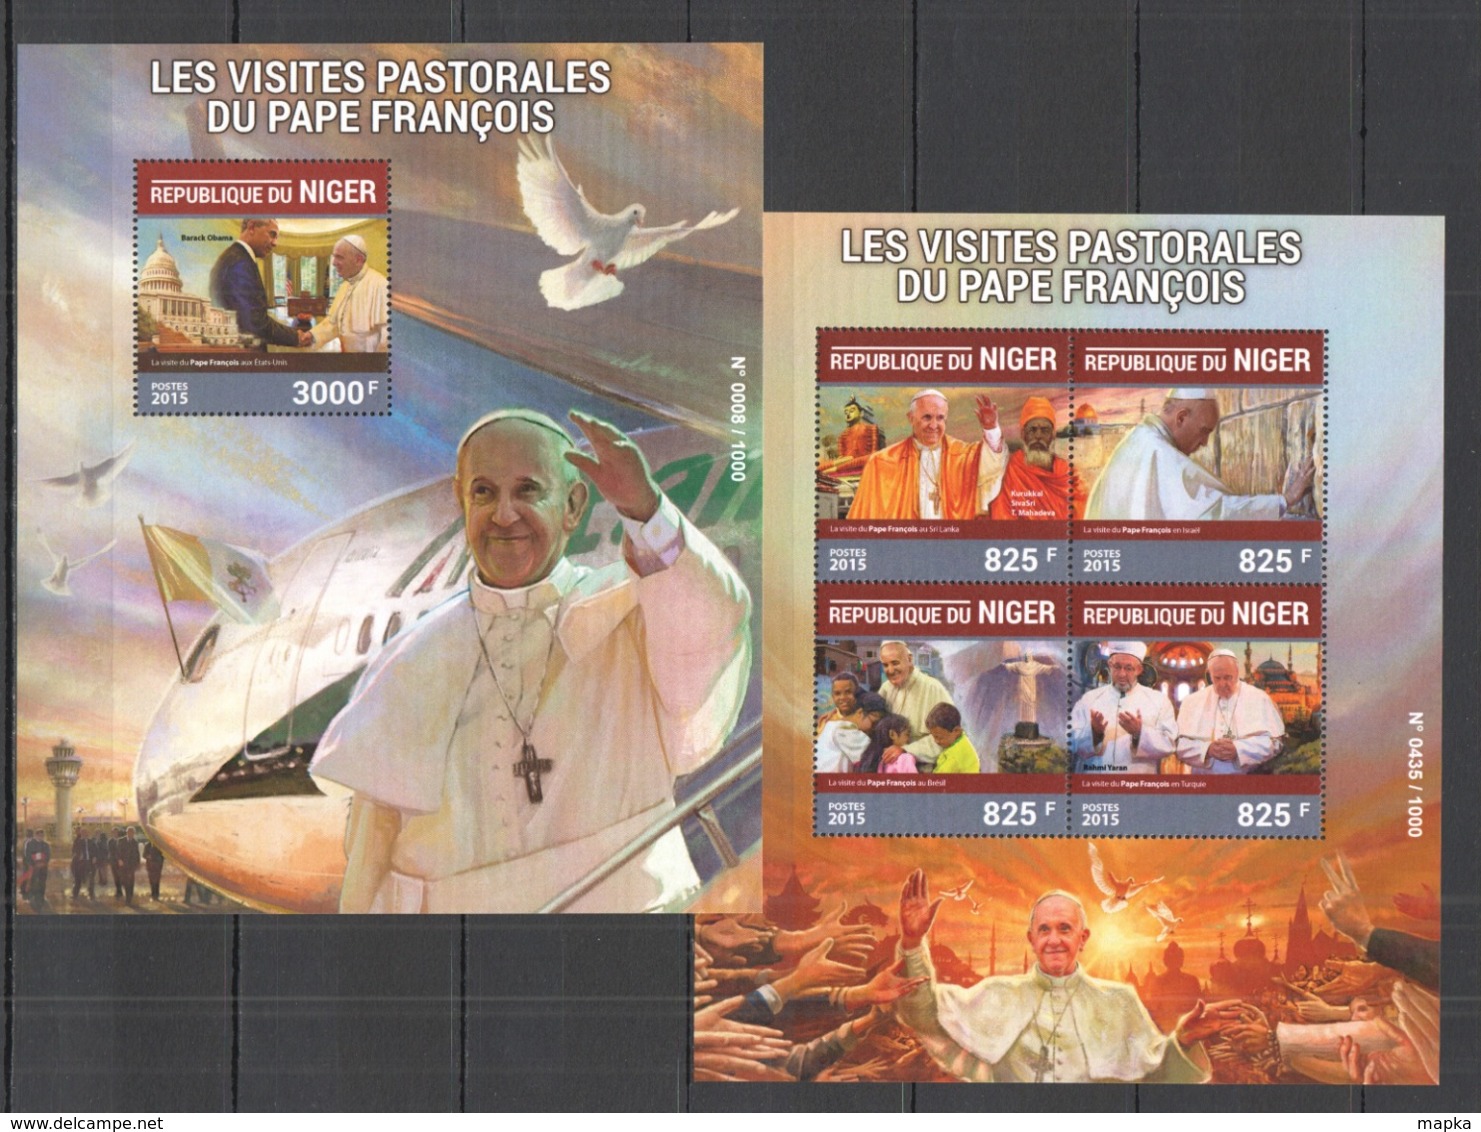 AA977 2015 NIGER FAMOUS PEOPLE  POPE FRANCIS VISITS  KB+BL MNH - Päpste